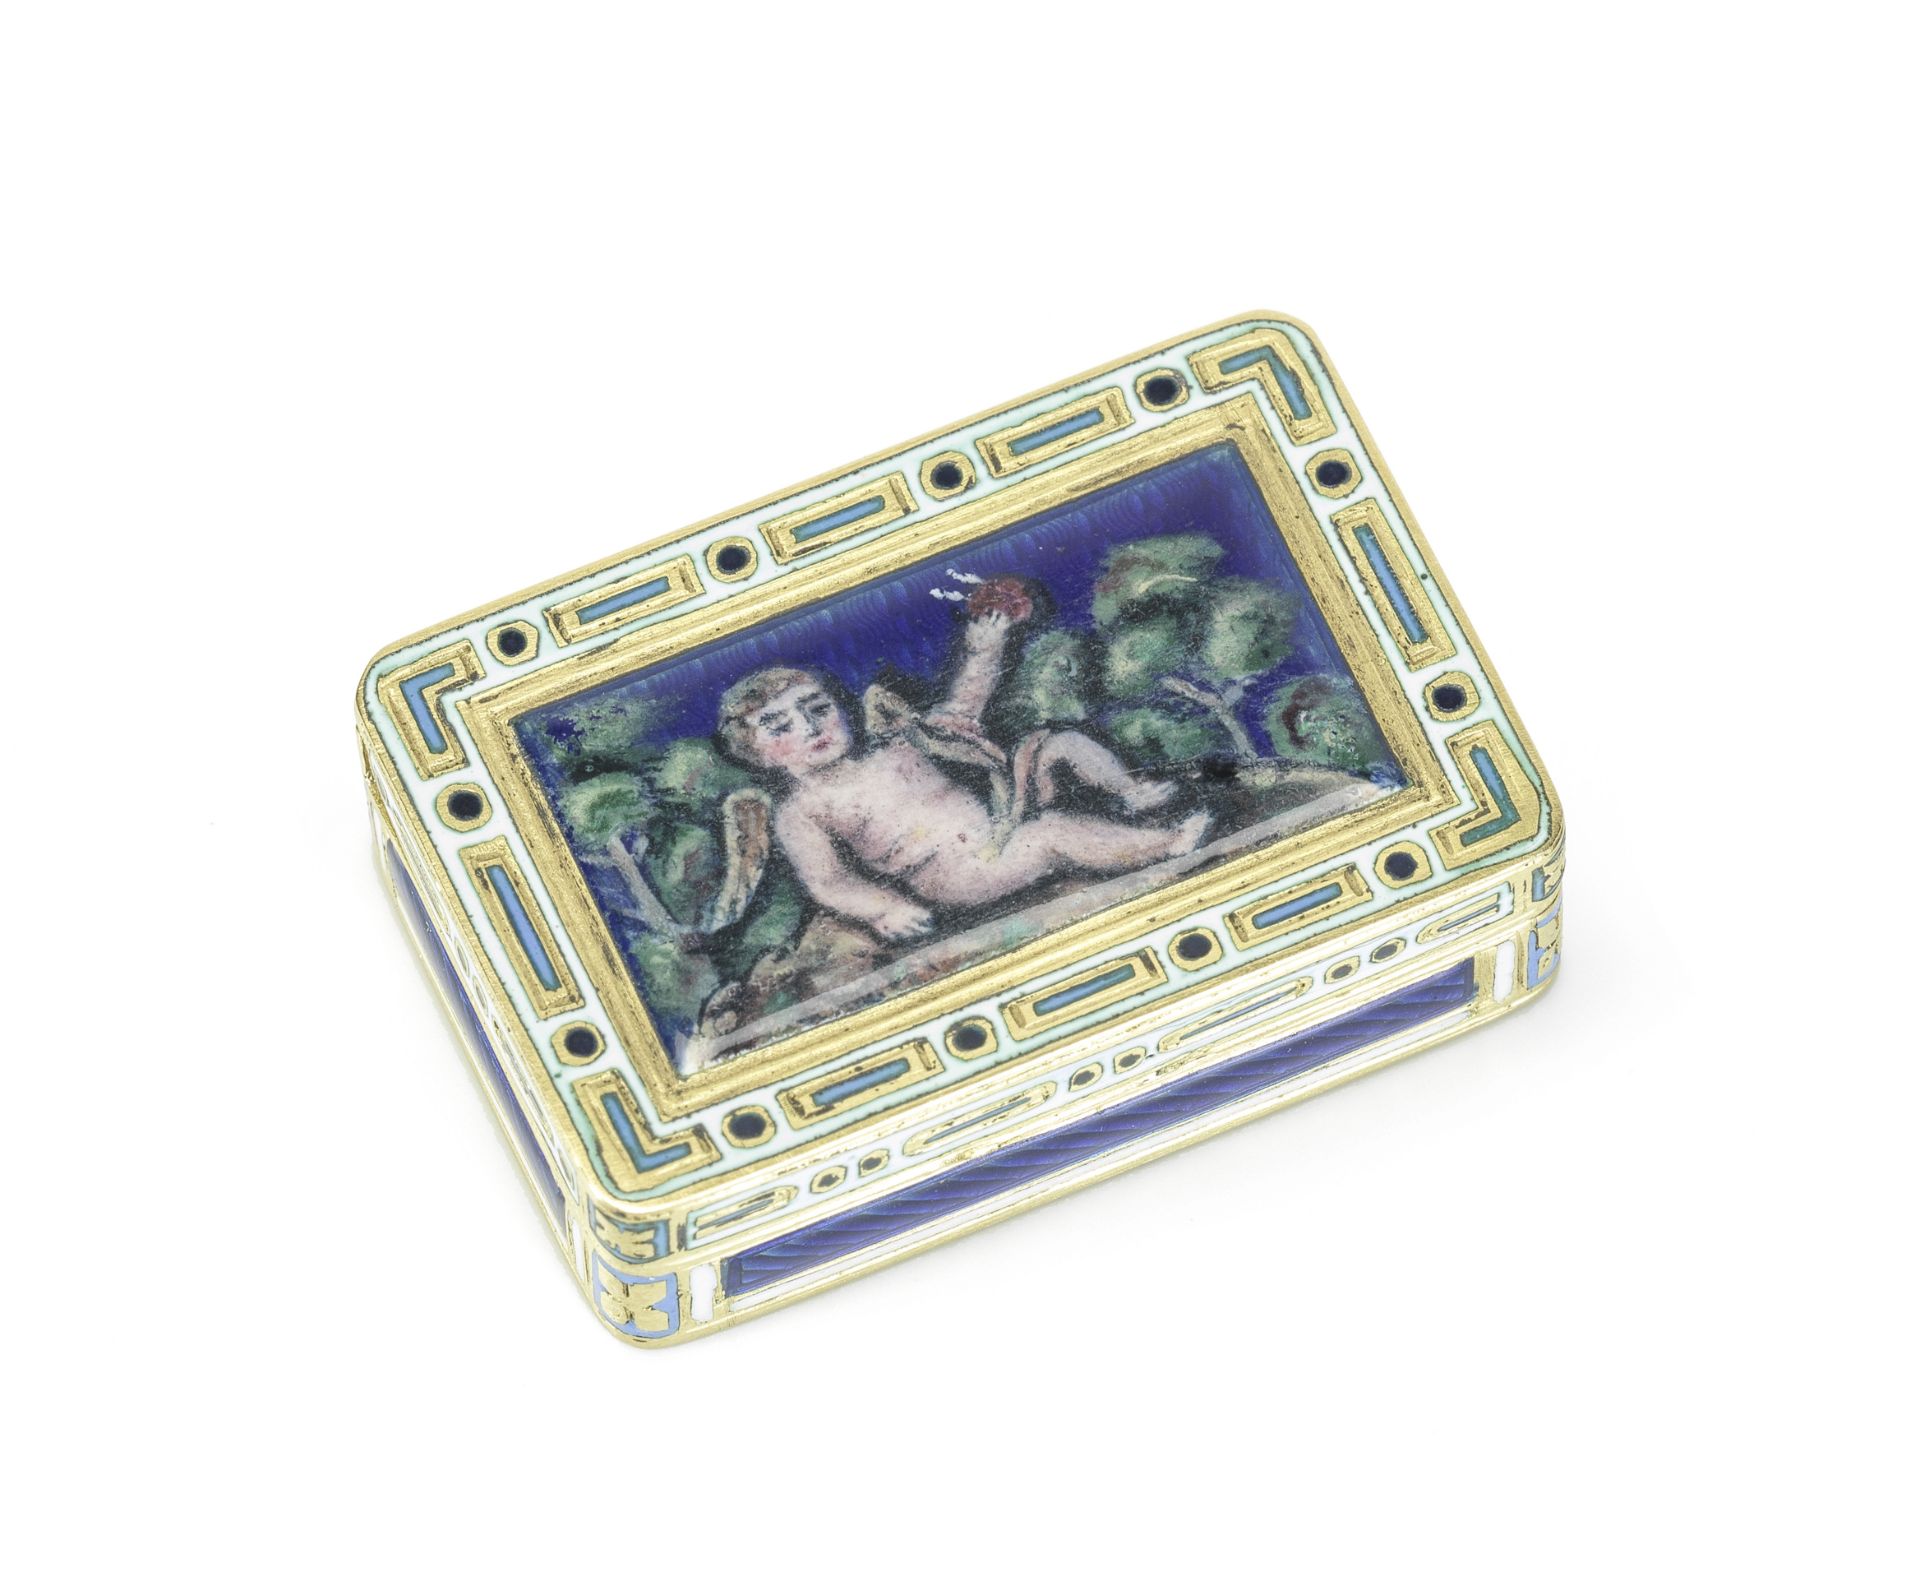 A 19th century French gold and enamel vinaigrette marked with 1809 - 1819 Paris marks, and also 1...